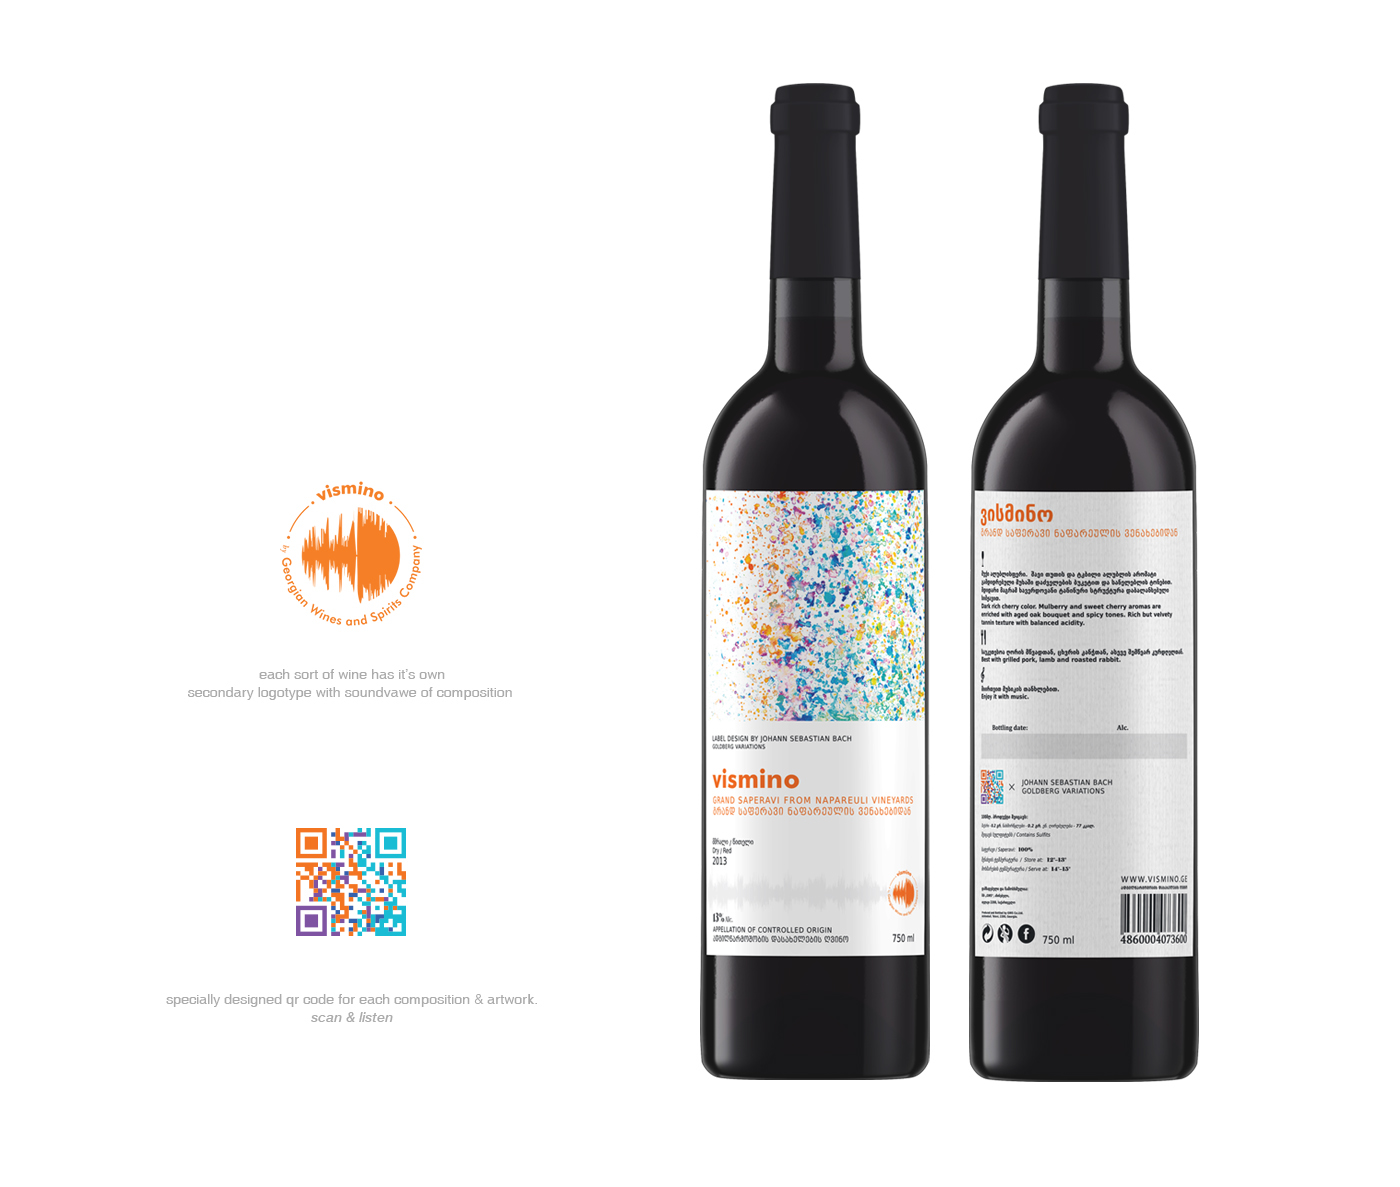 wine paint package sound Classic modern designed by music splash Label experiment Piano soundwave alcohol